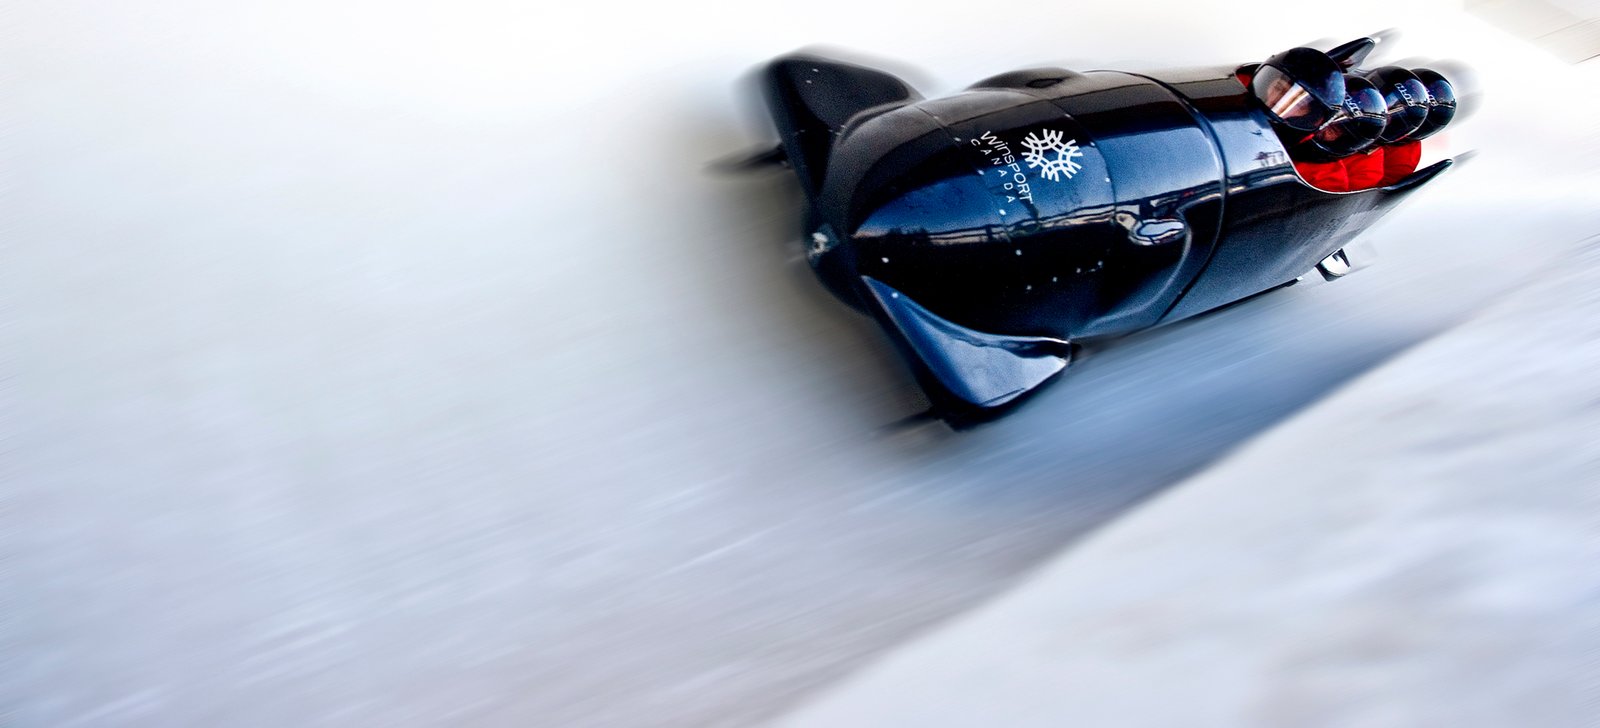 Blurry bobsled as it rides past the camera with four people in it.